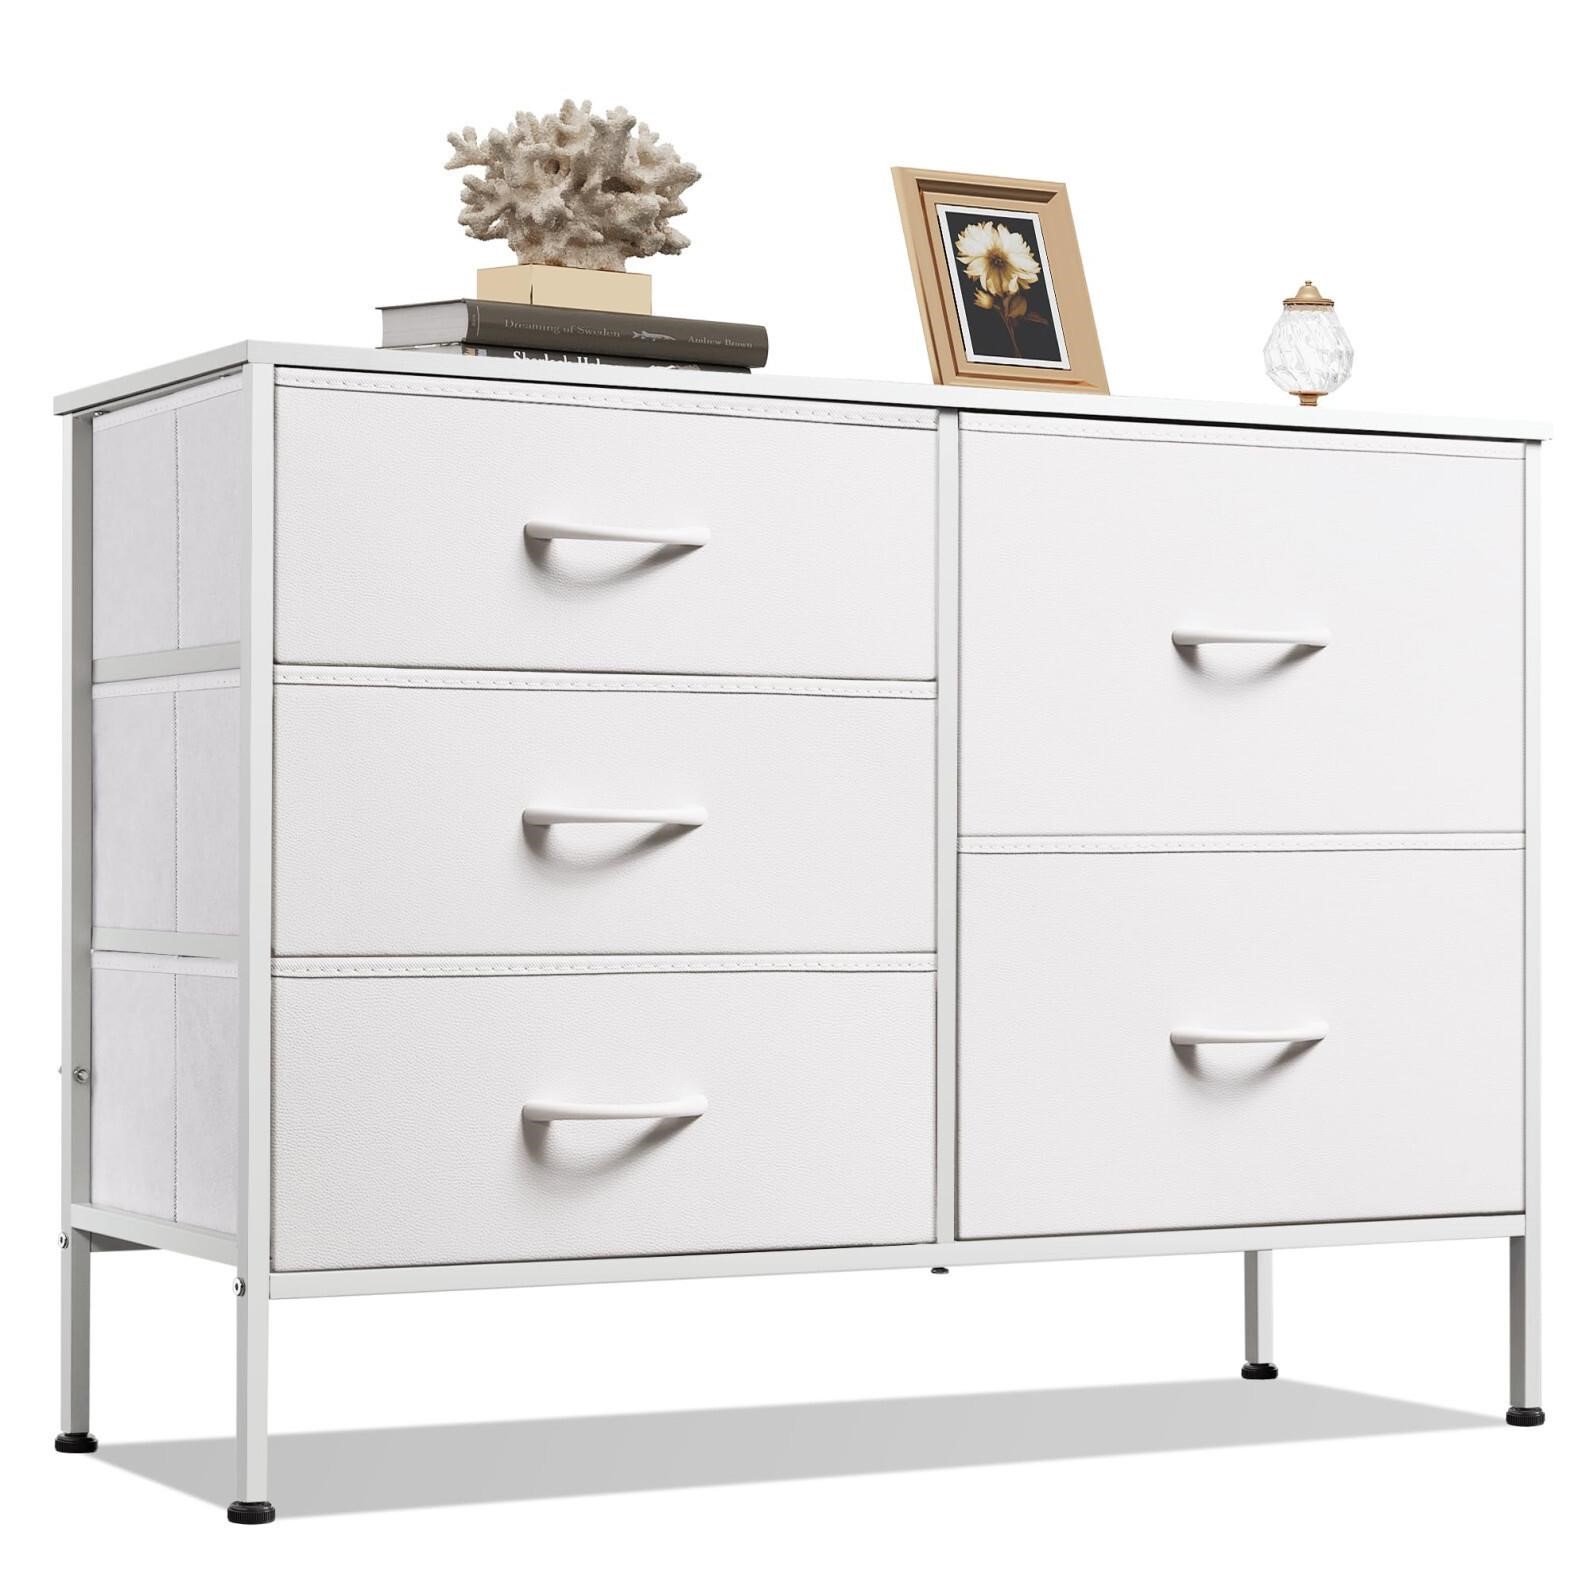 WLIVE Dresser for Bedroom with 5 Drawers, Wide Bed